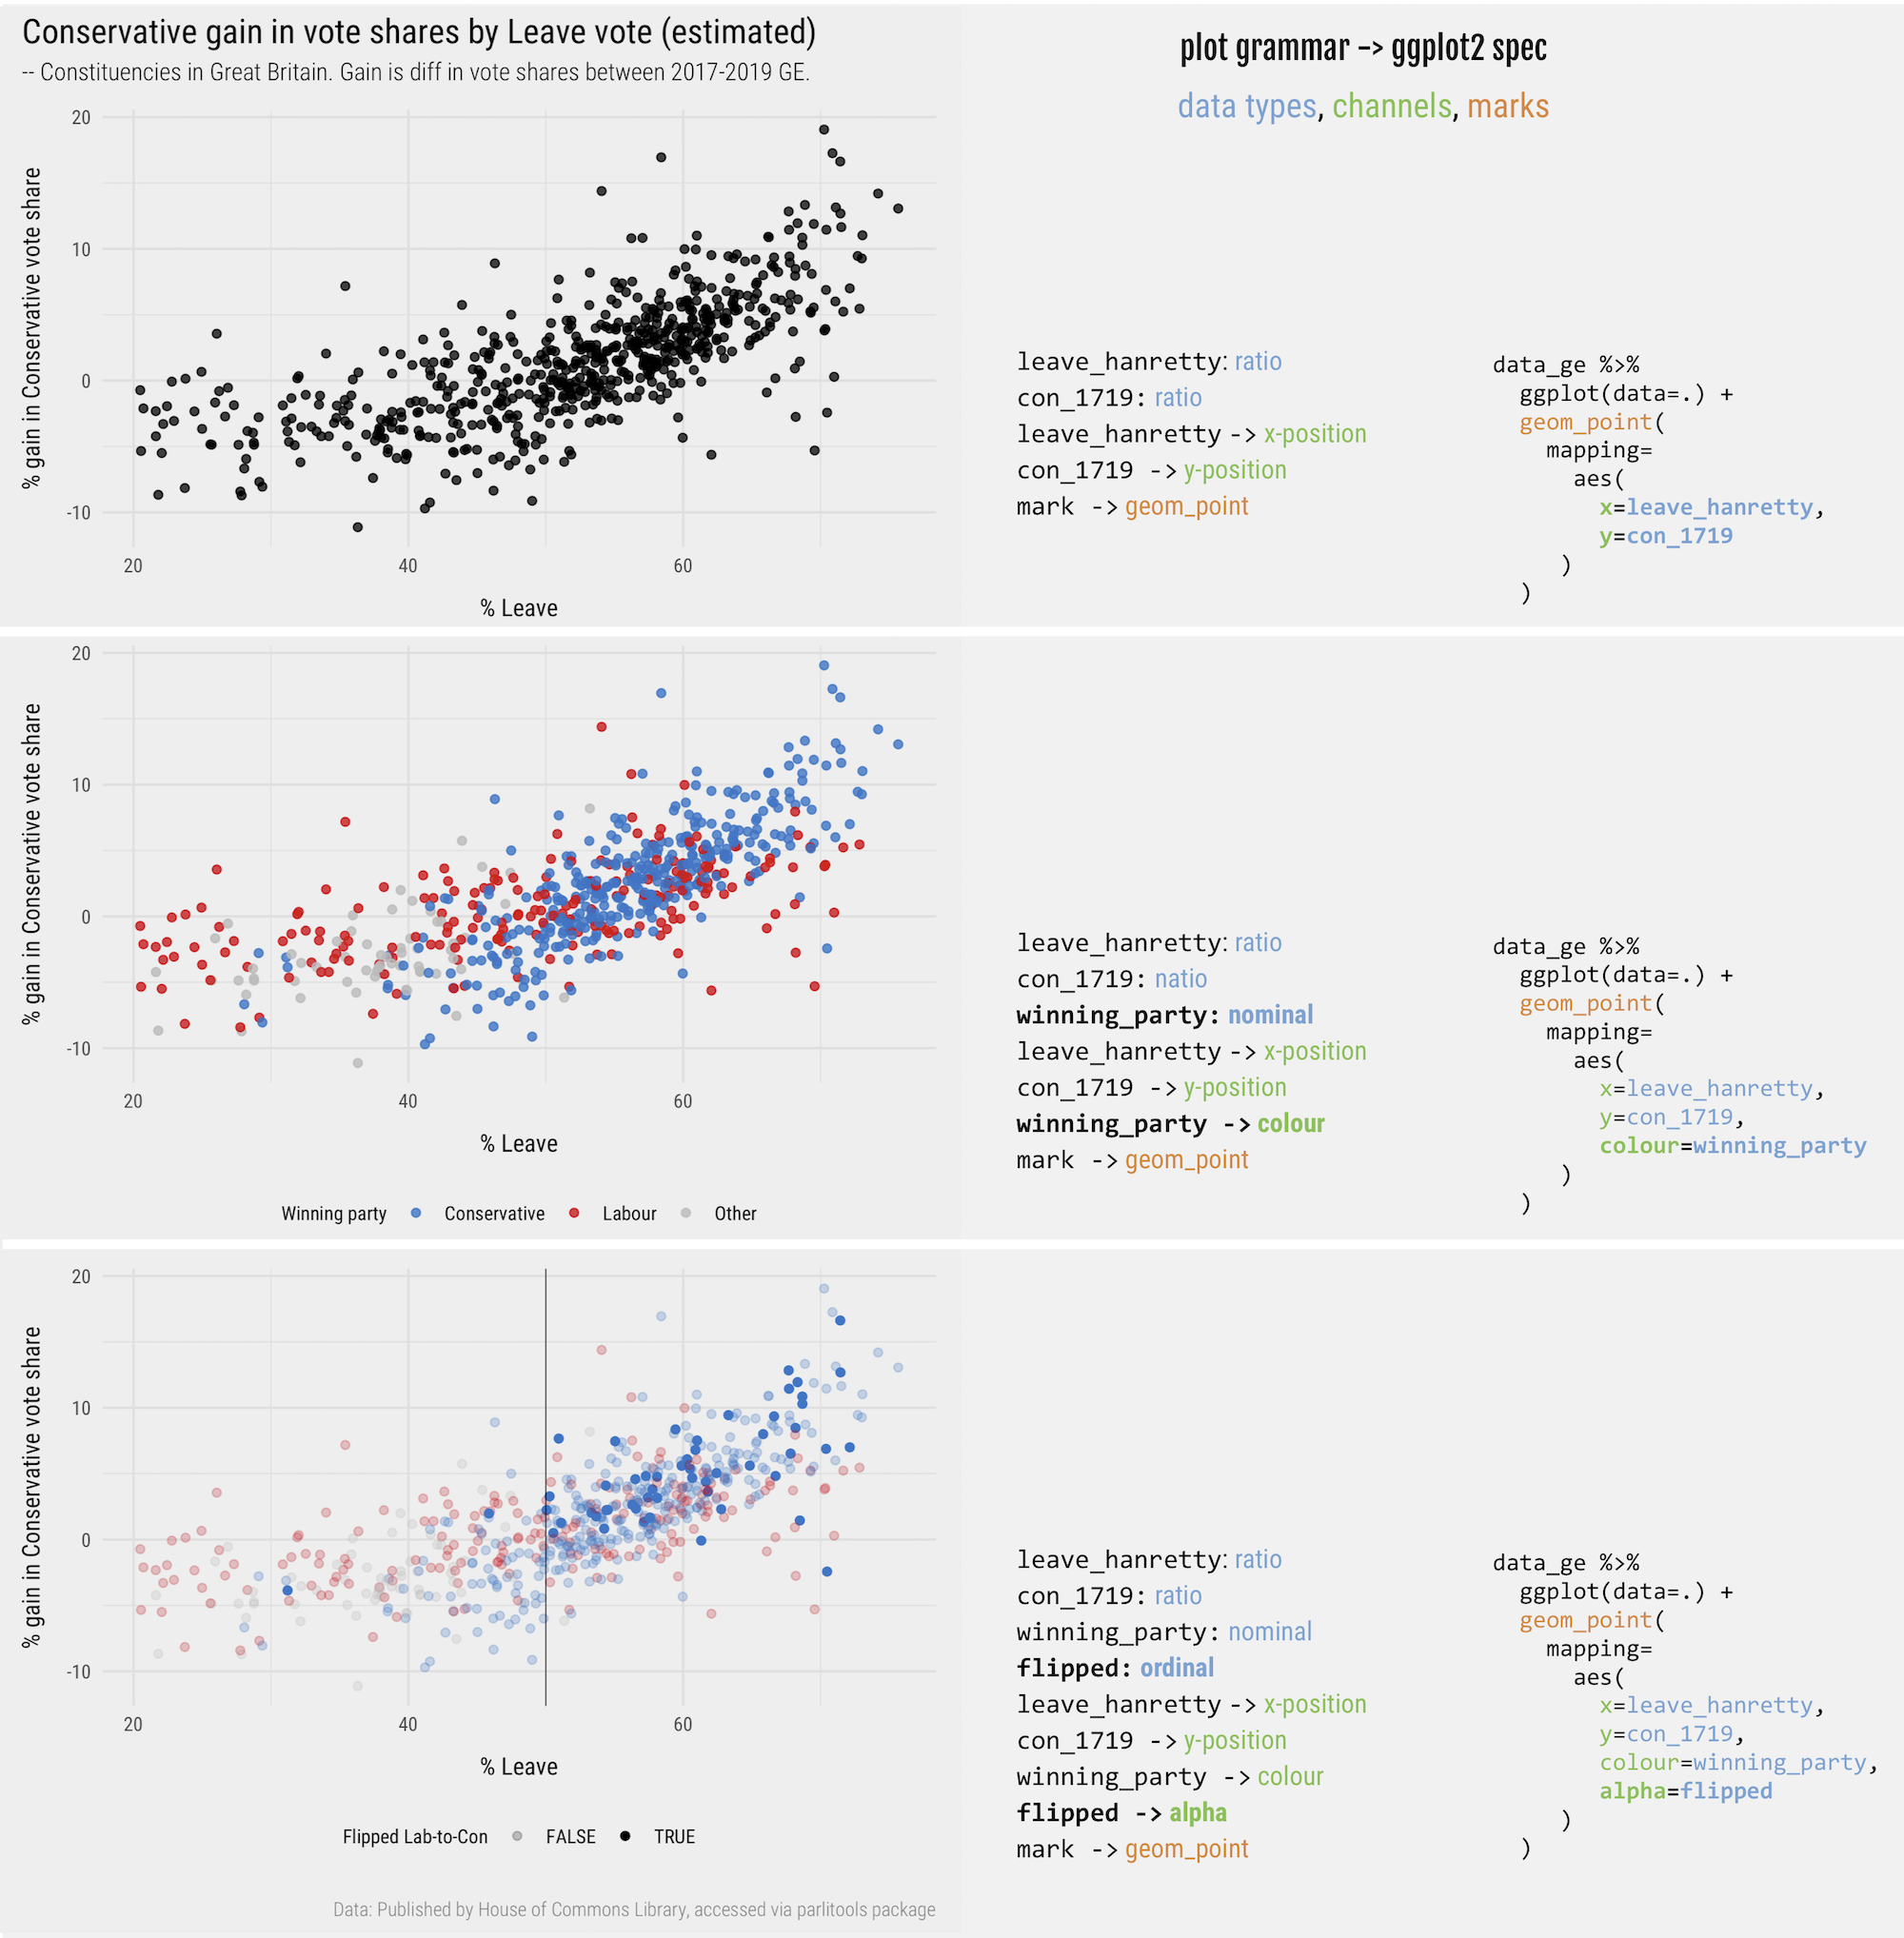 Plots, grammars and associated `ggplot2` specifications for the scatterplot.